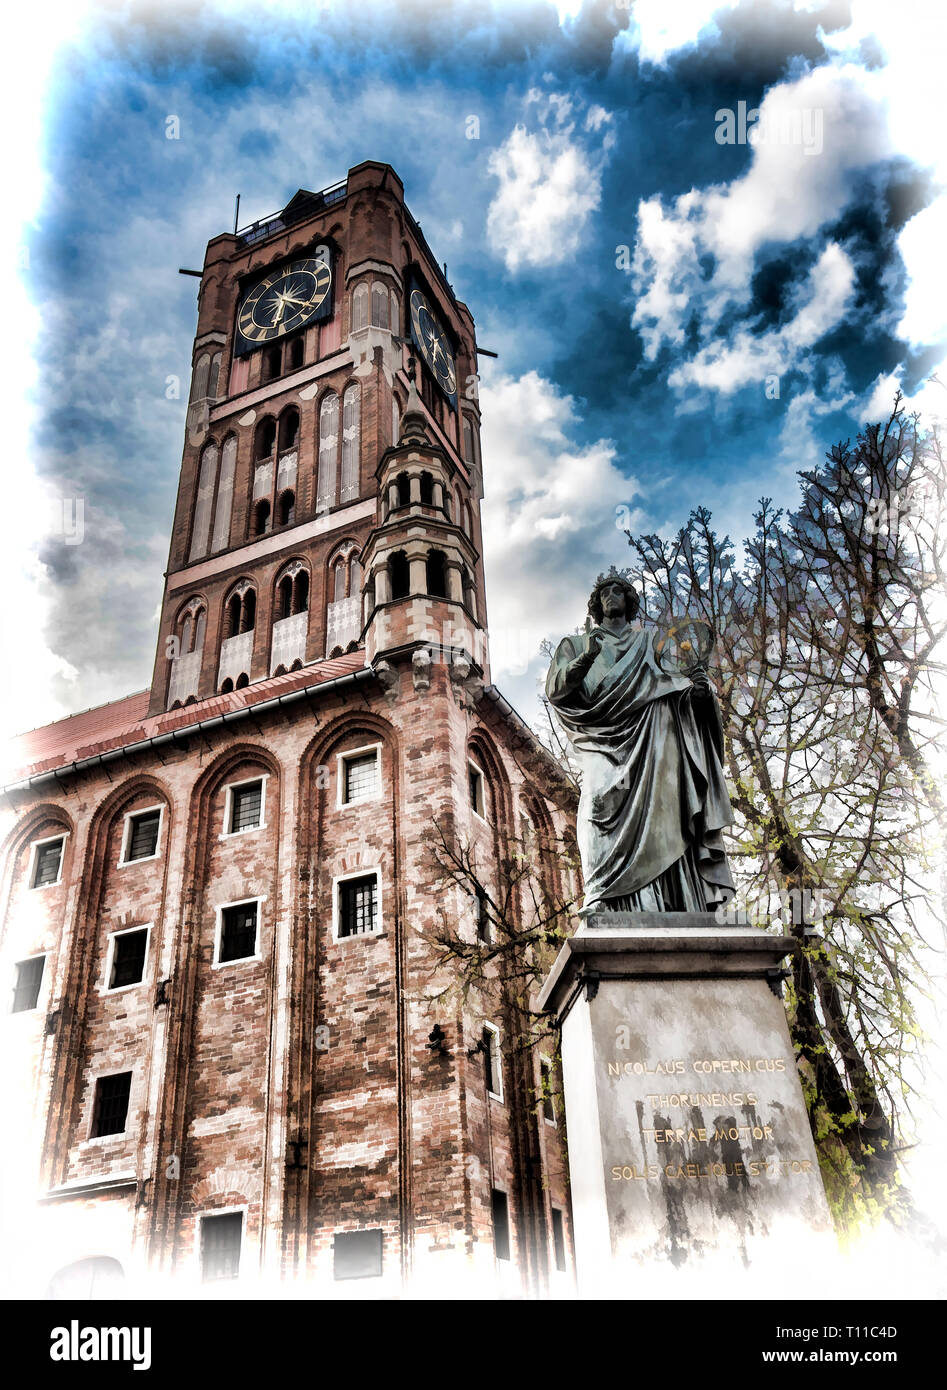 Nicolaus Copernicus Statue and City Hall Tower in Torun in Poland. Stock Photo